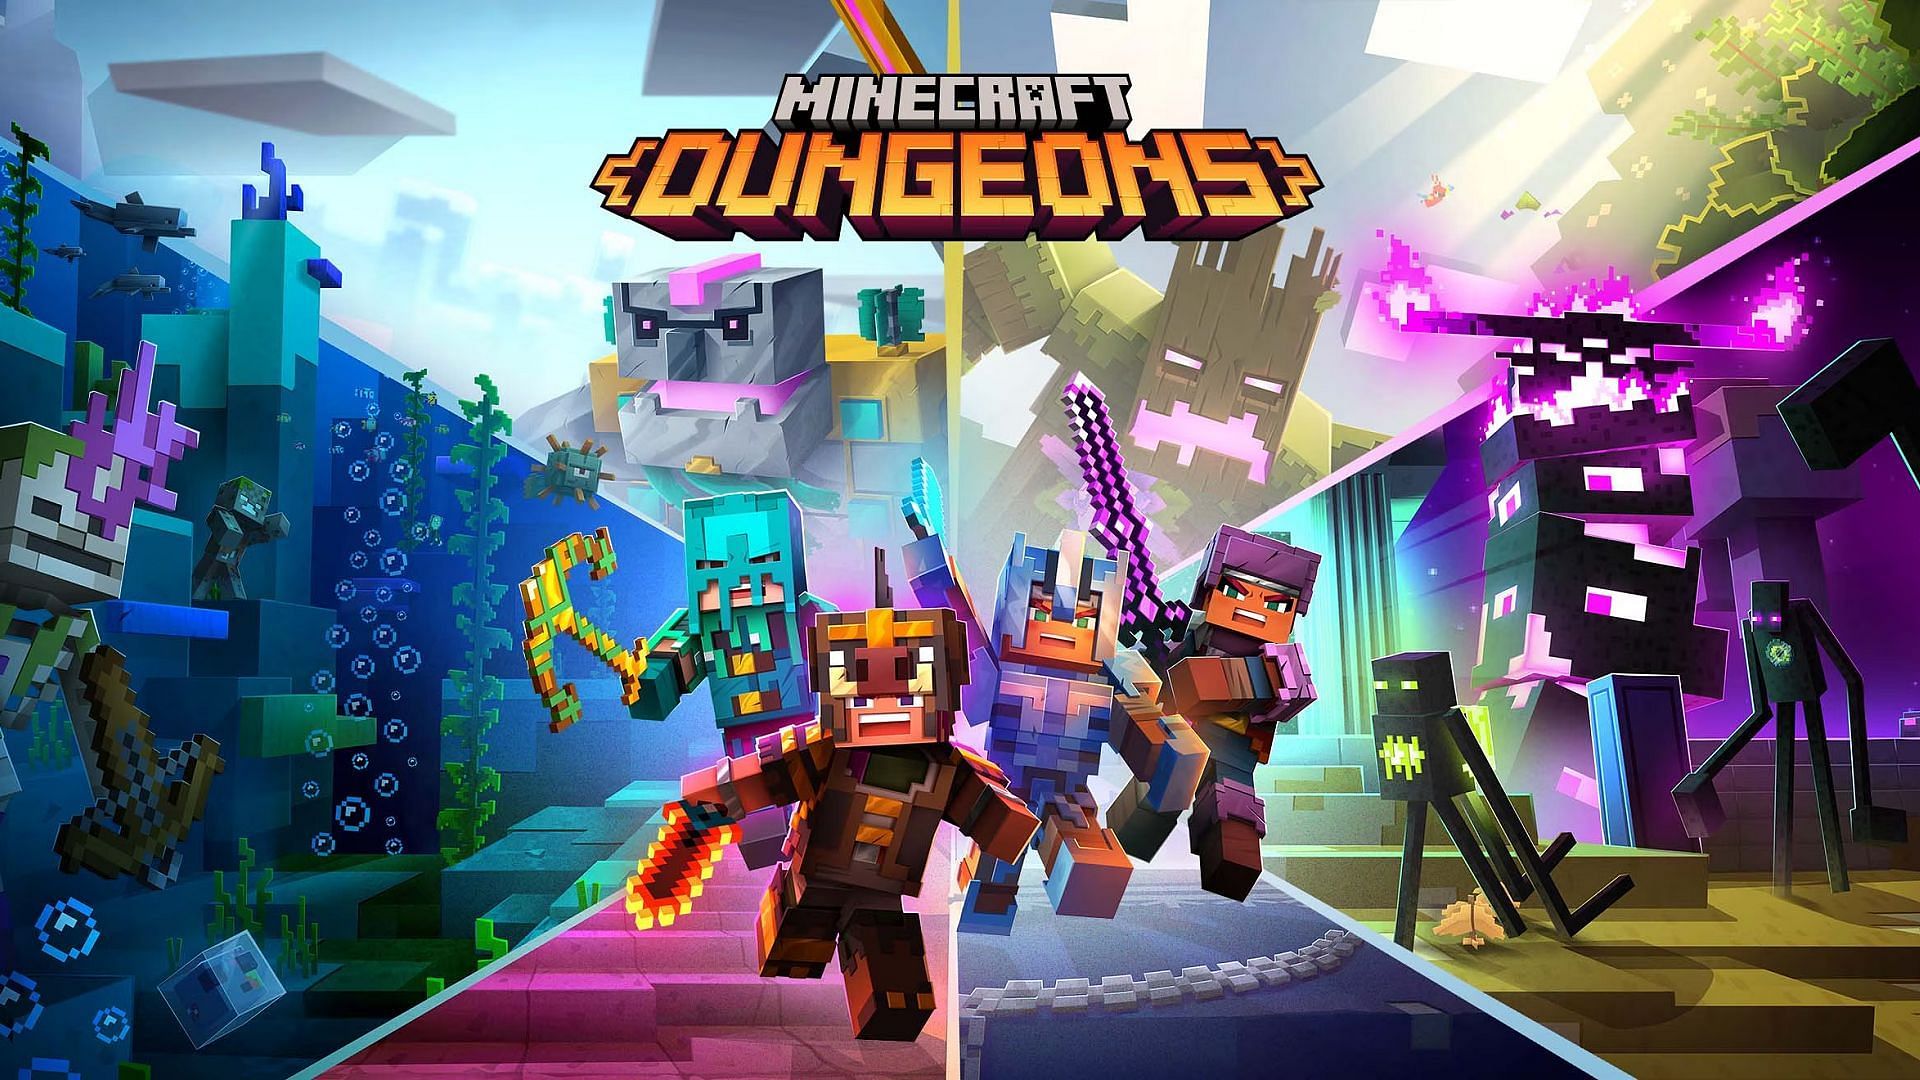 Minecraft Dungeons can be plenty of fun, but many fans will likely move on in not too long (Image via Mojang)